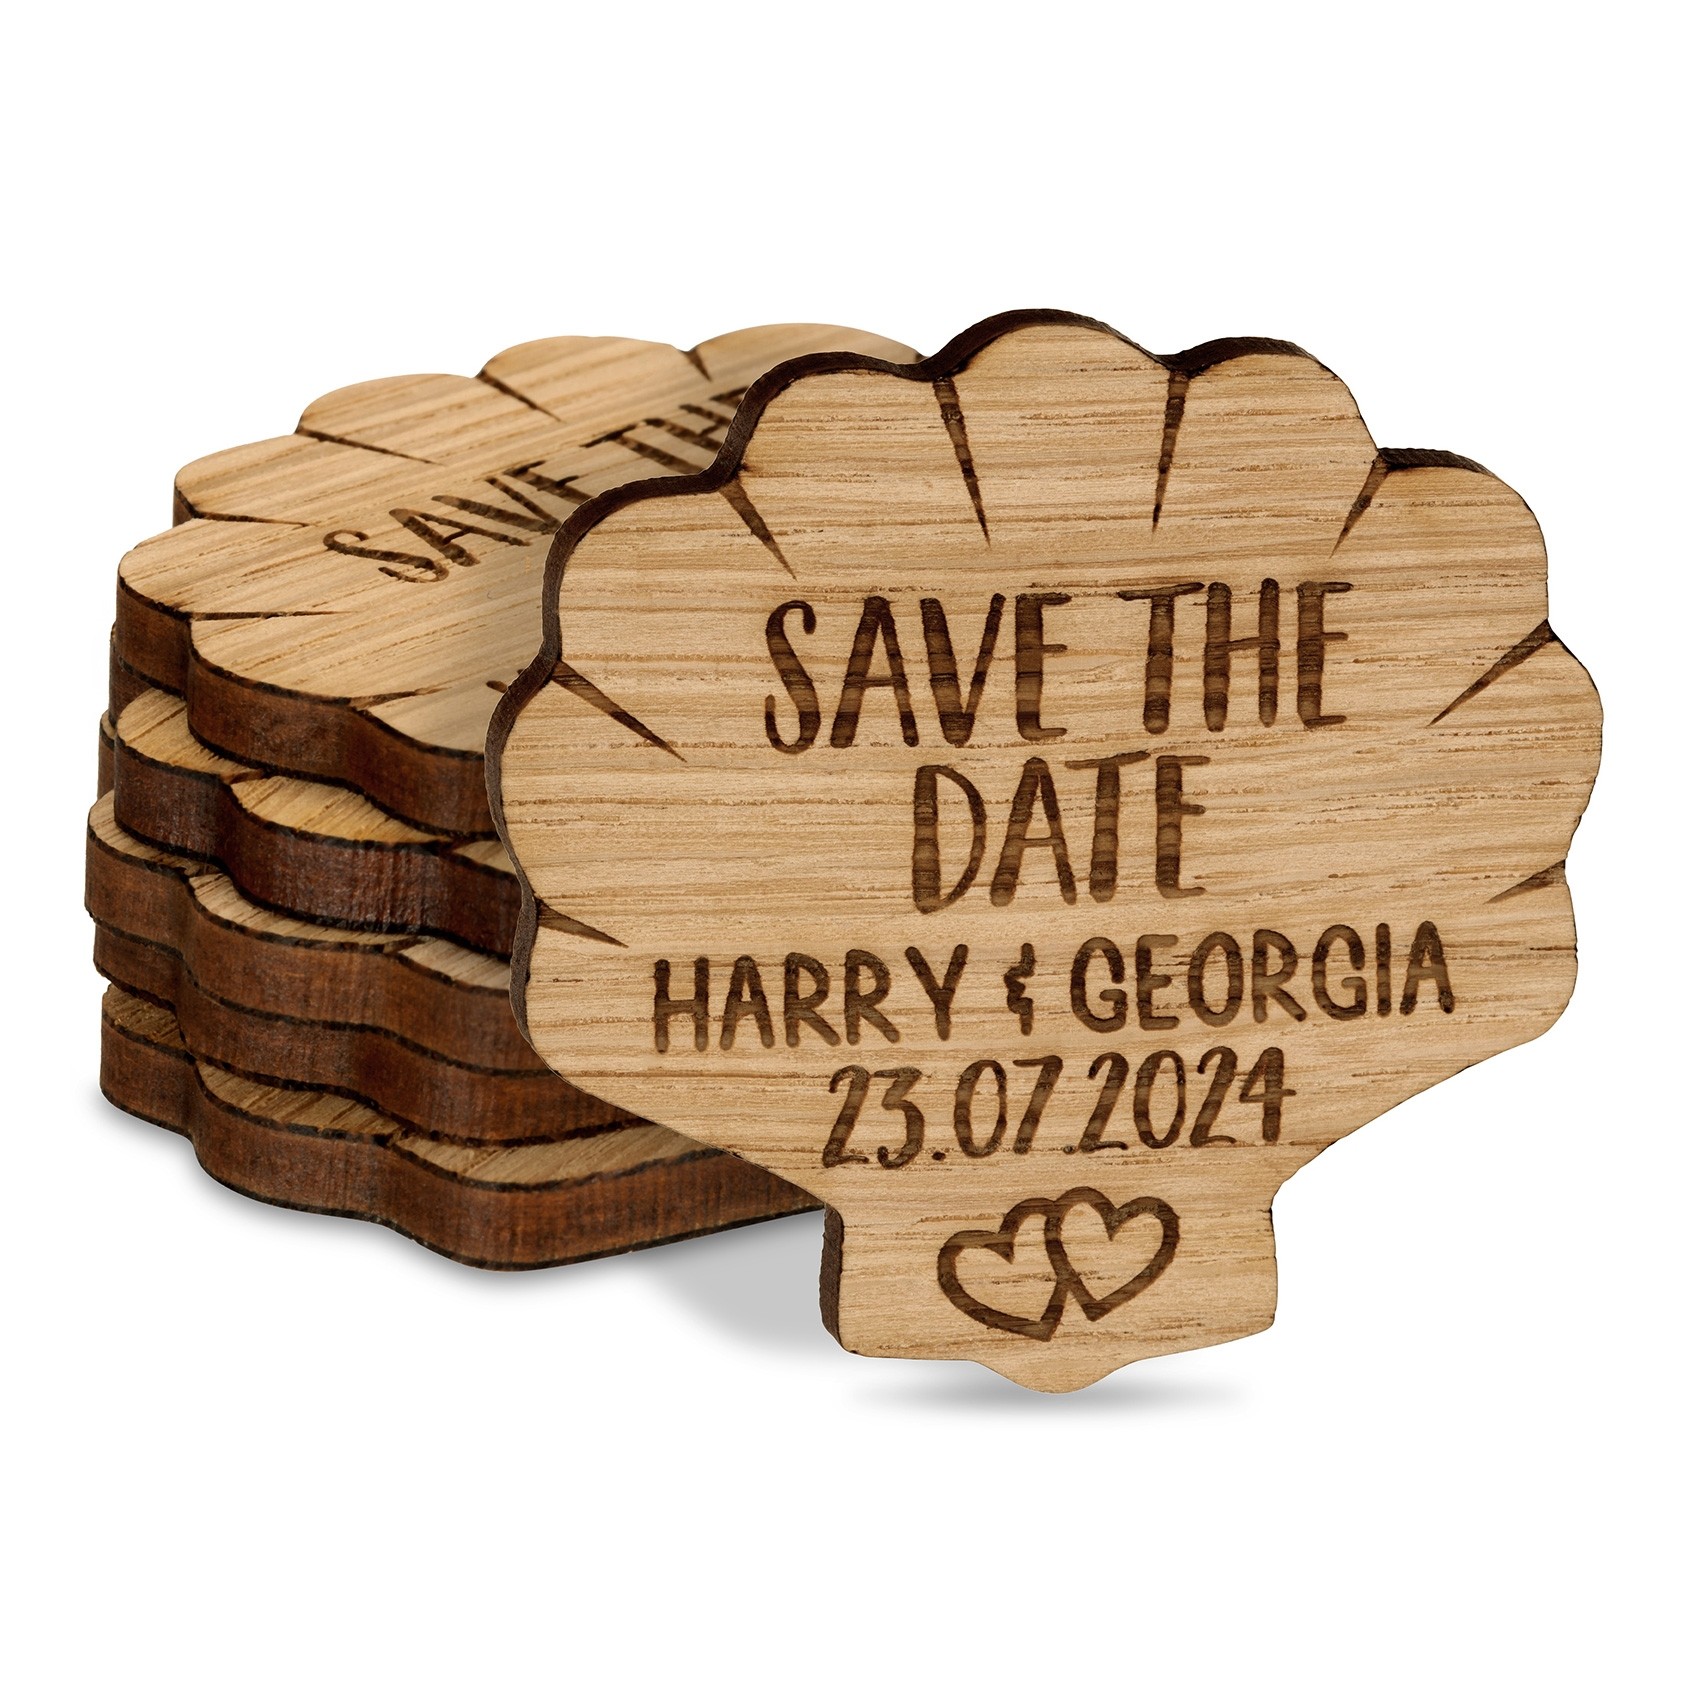 Personalised Wedding Save The Date or Evening Invitations Fridge Magnets Cards Shell Beach Envelopes Wooden Favours Charms Rustic Oak Custom 